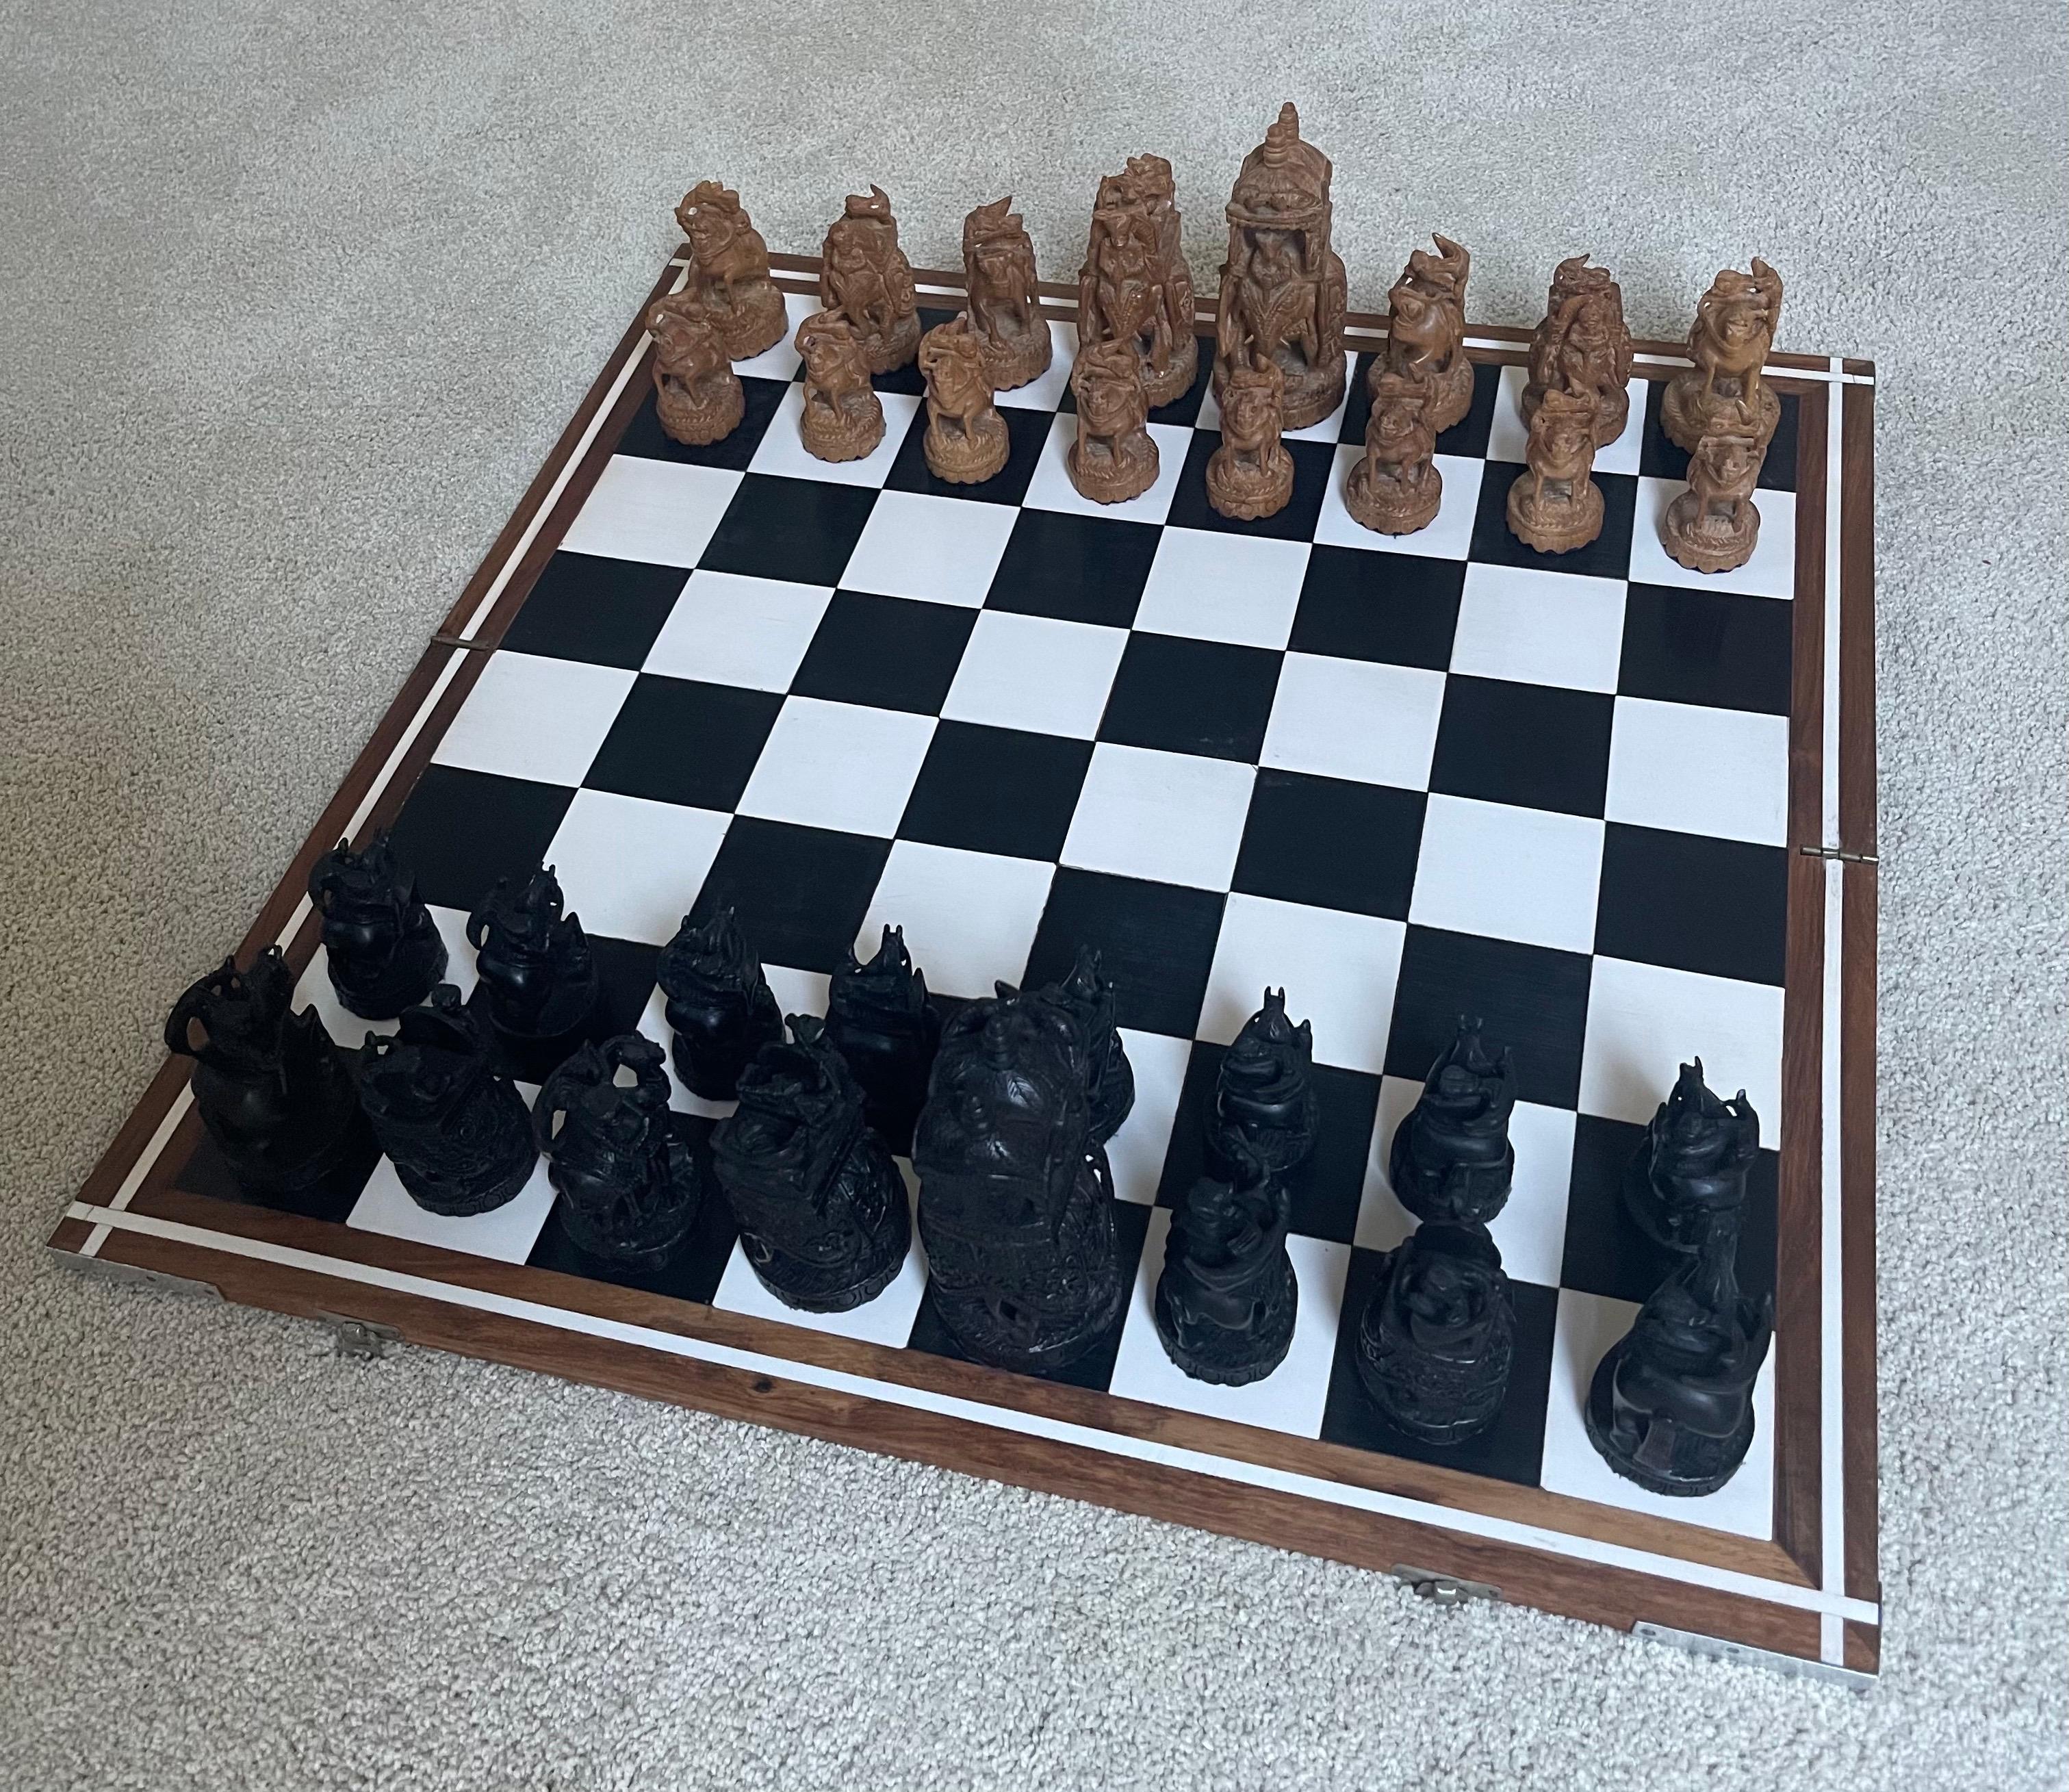 Large hand carved vintage Rajasthani / Indian chess set with foldable wooden board, circa 1960s. The chess pieces are made of what I believe to be resin (although they really look like wood) and are intricately hand carved with amazing detail; they